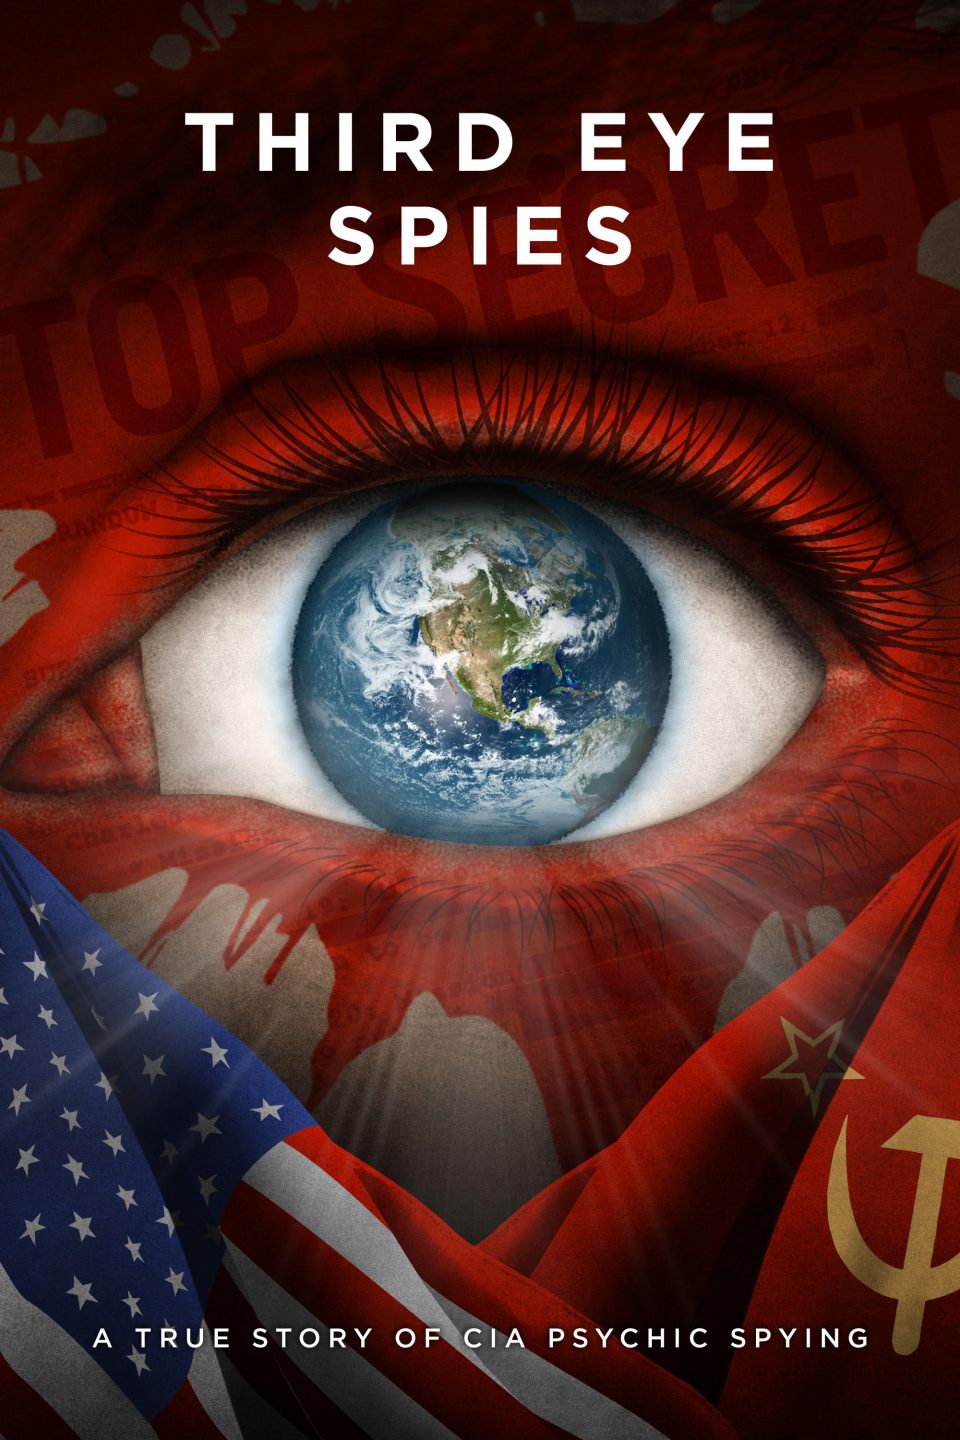 Third Eye Spies poster (The Orchard)